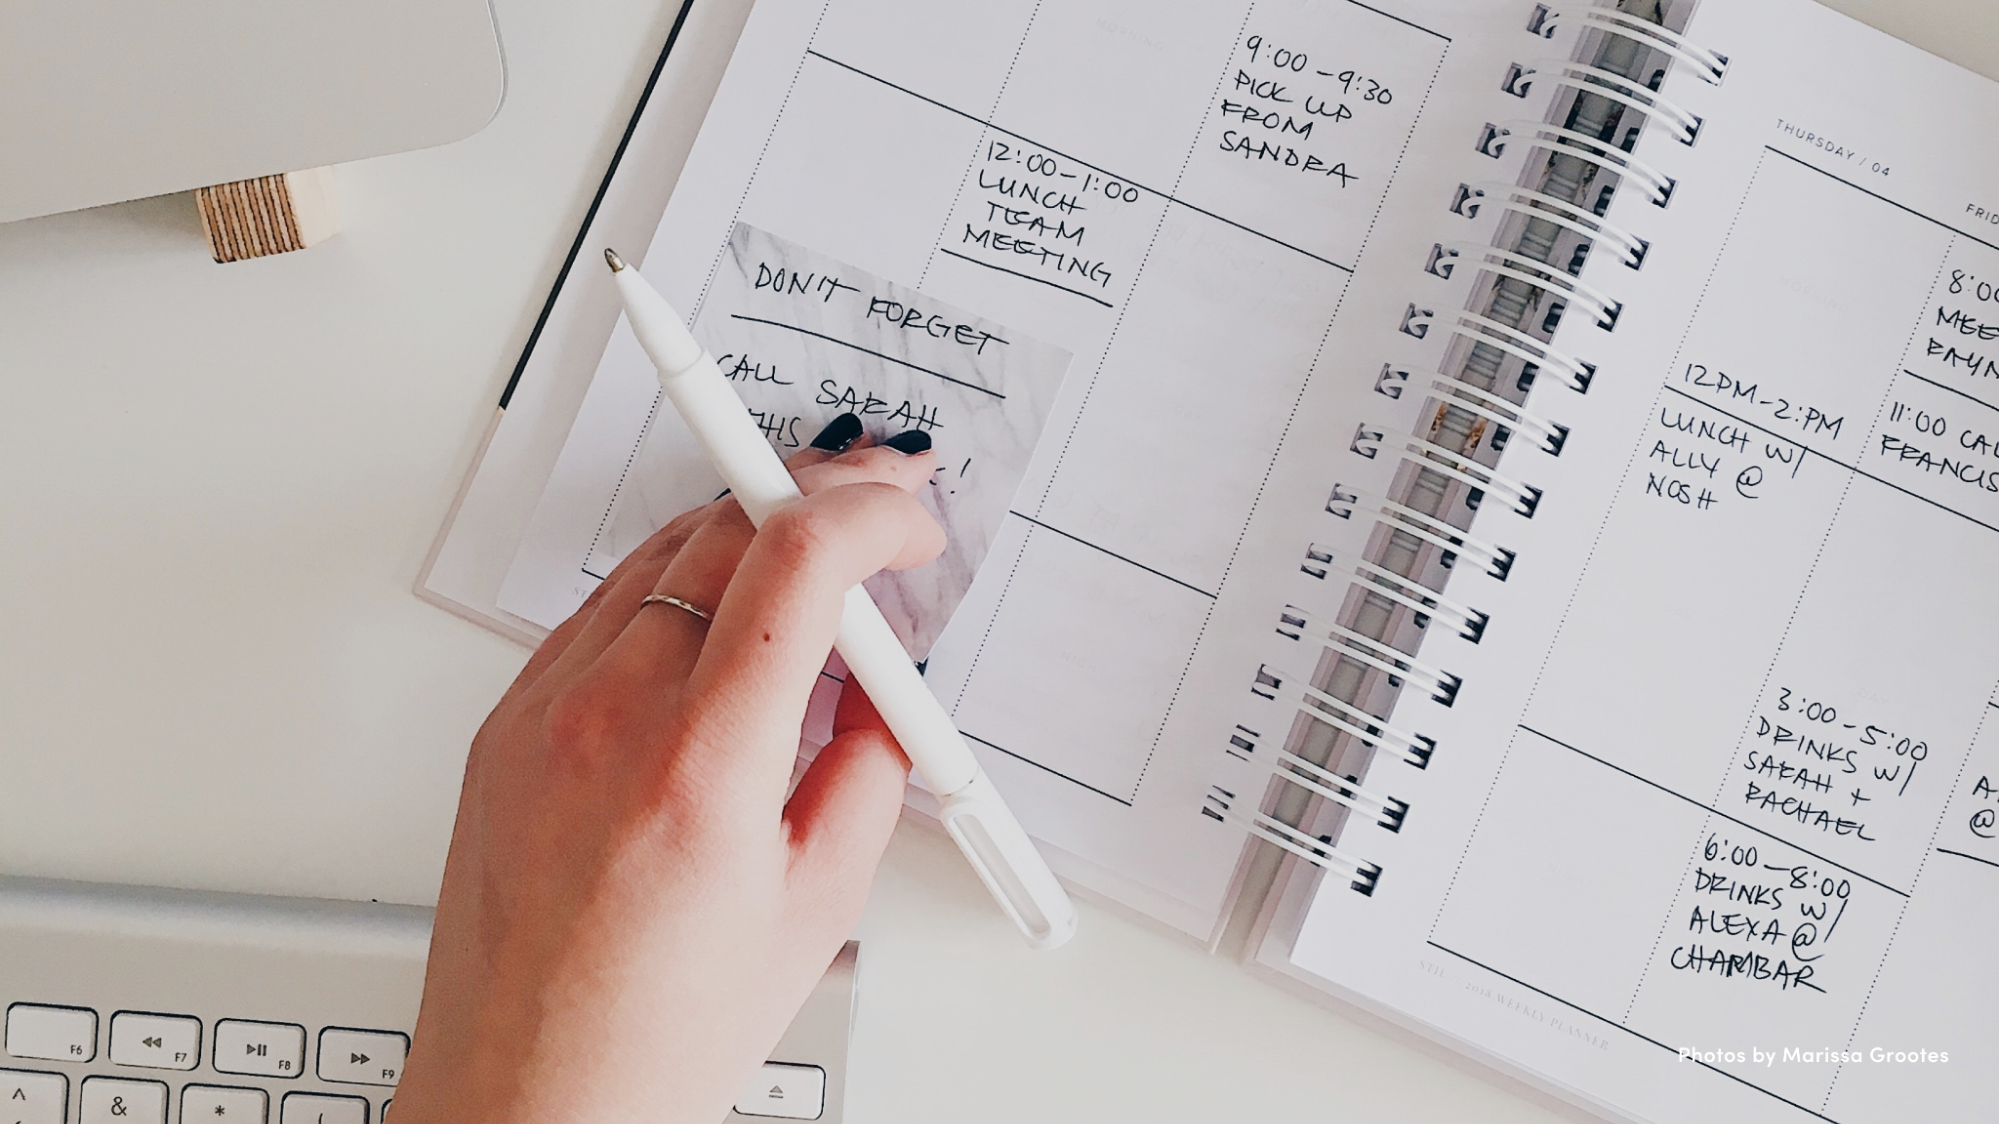 Hand holding a pen and placing a sticky note on a personal calendar.